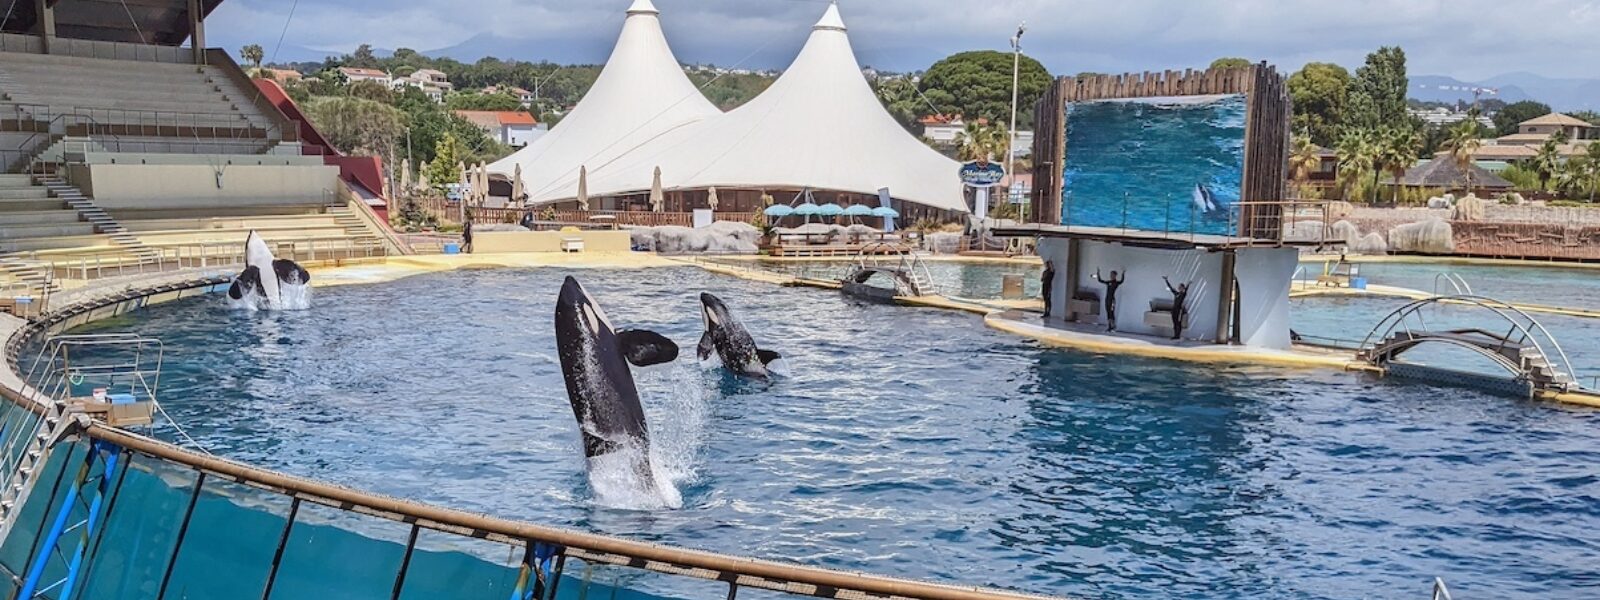 Orcas Perform at Marineland Antibes.  Photo Credit: Kelly Wilsey